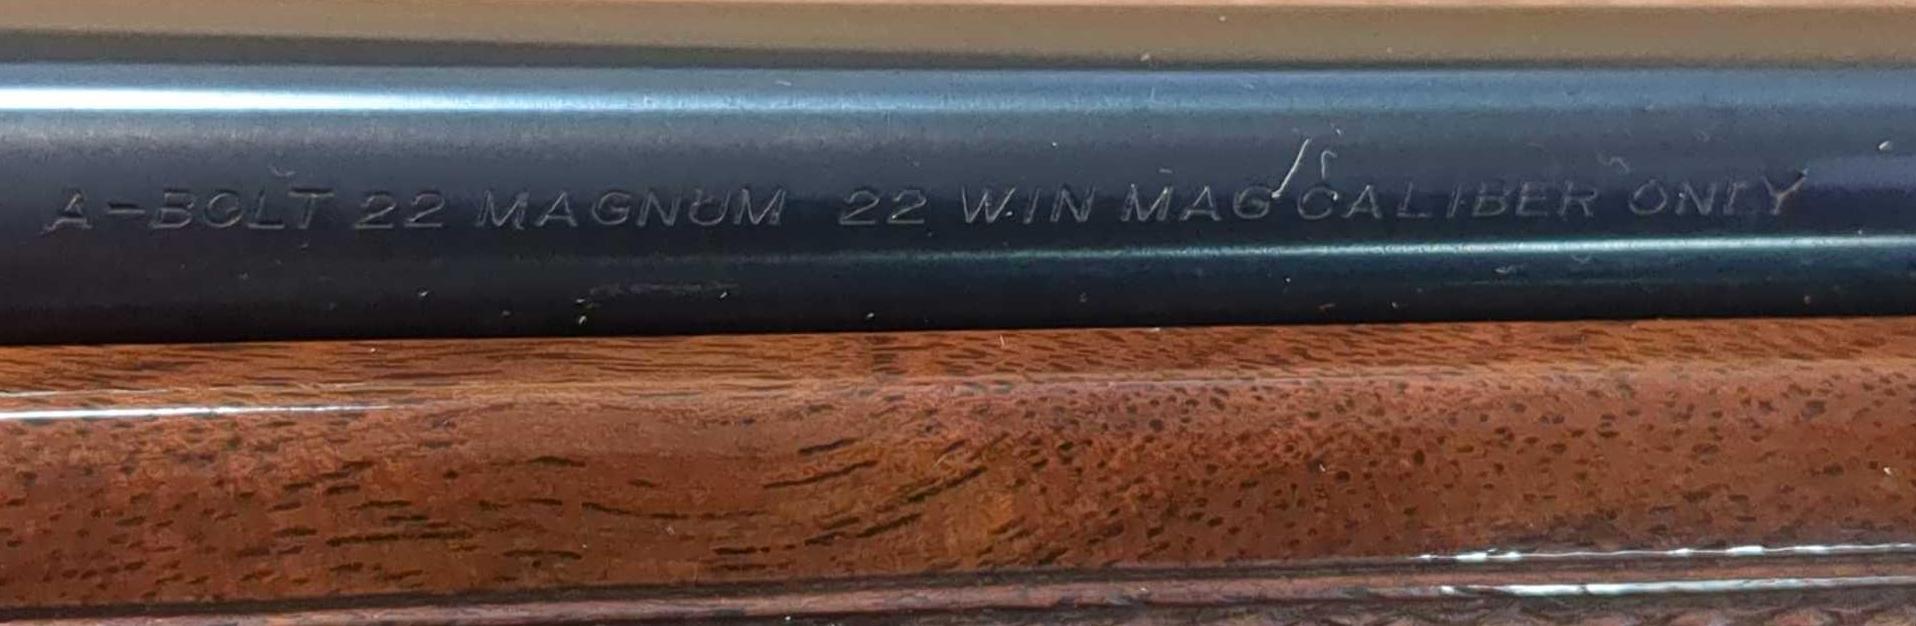 BROWNING MODEL A-BOLT .22 MAG BOLT ACTION RIFLE